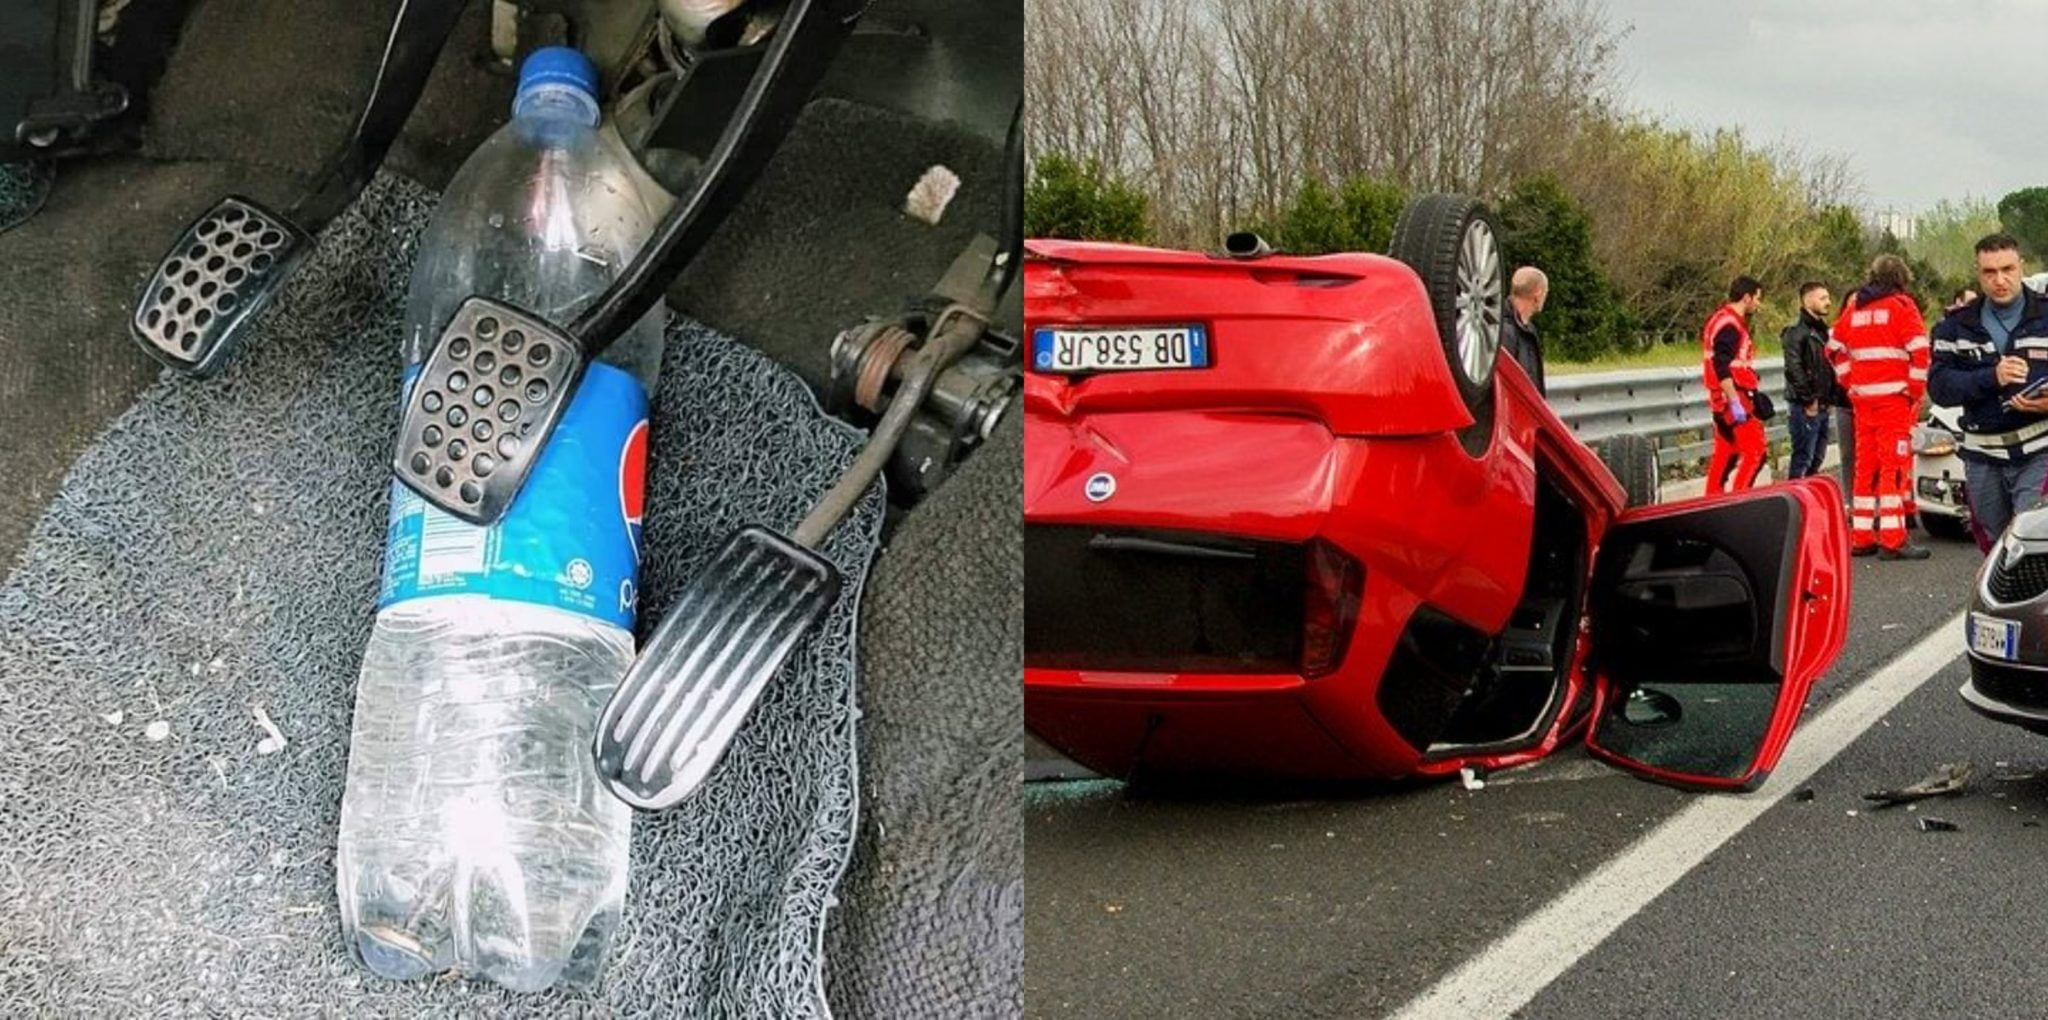 Keeping Water Bottles in Car Can Overturn Your Car